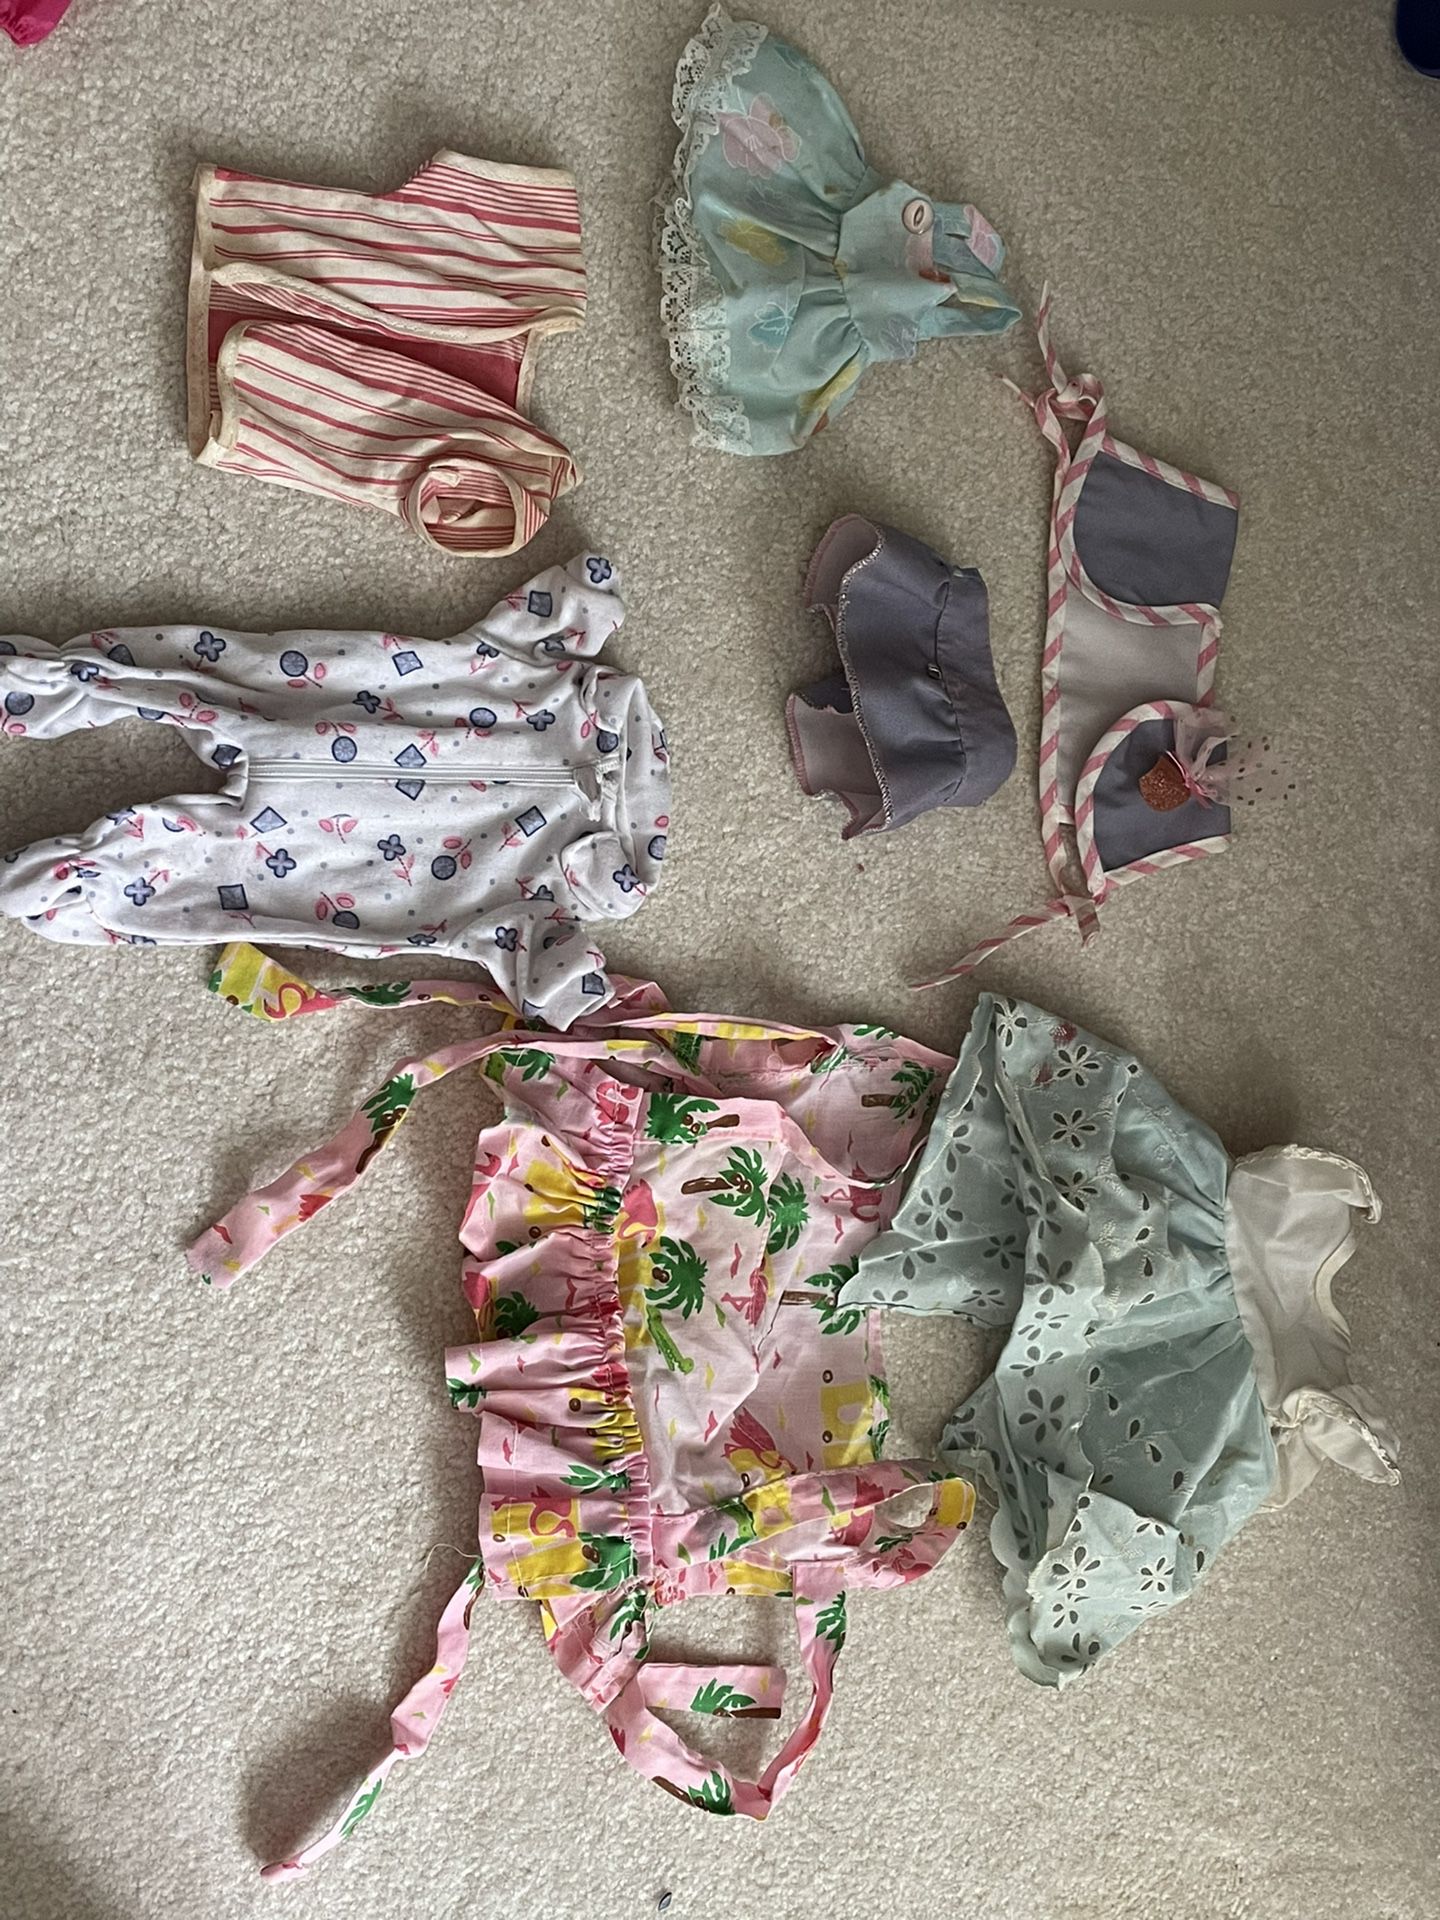 Vintage Doll Clothing- These are larger than barbie sized dolls